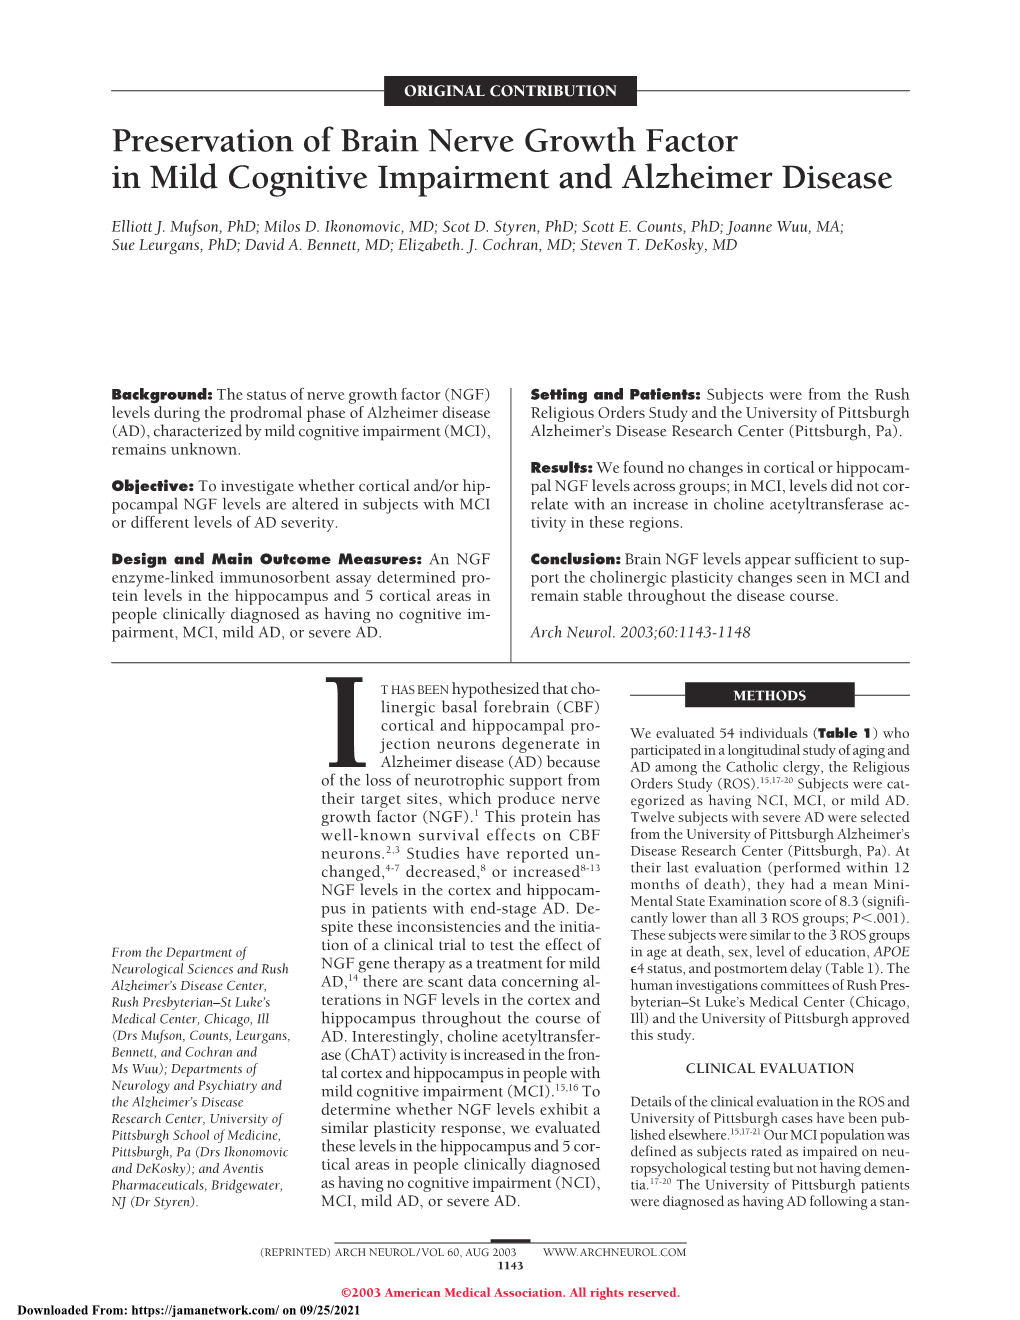 Preservation of Brain Nerve Growth Factor in Mild Cognitive Impairment and Alzheimer Disease